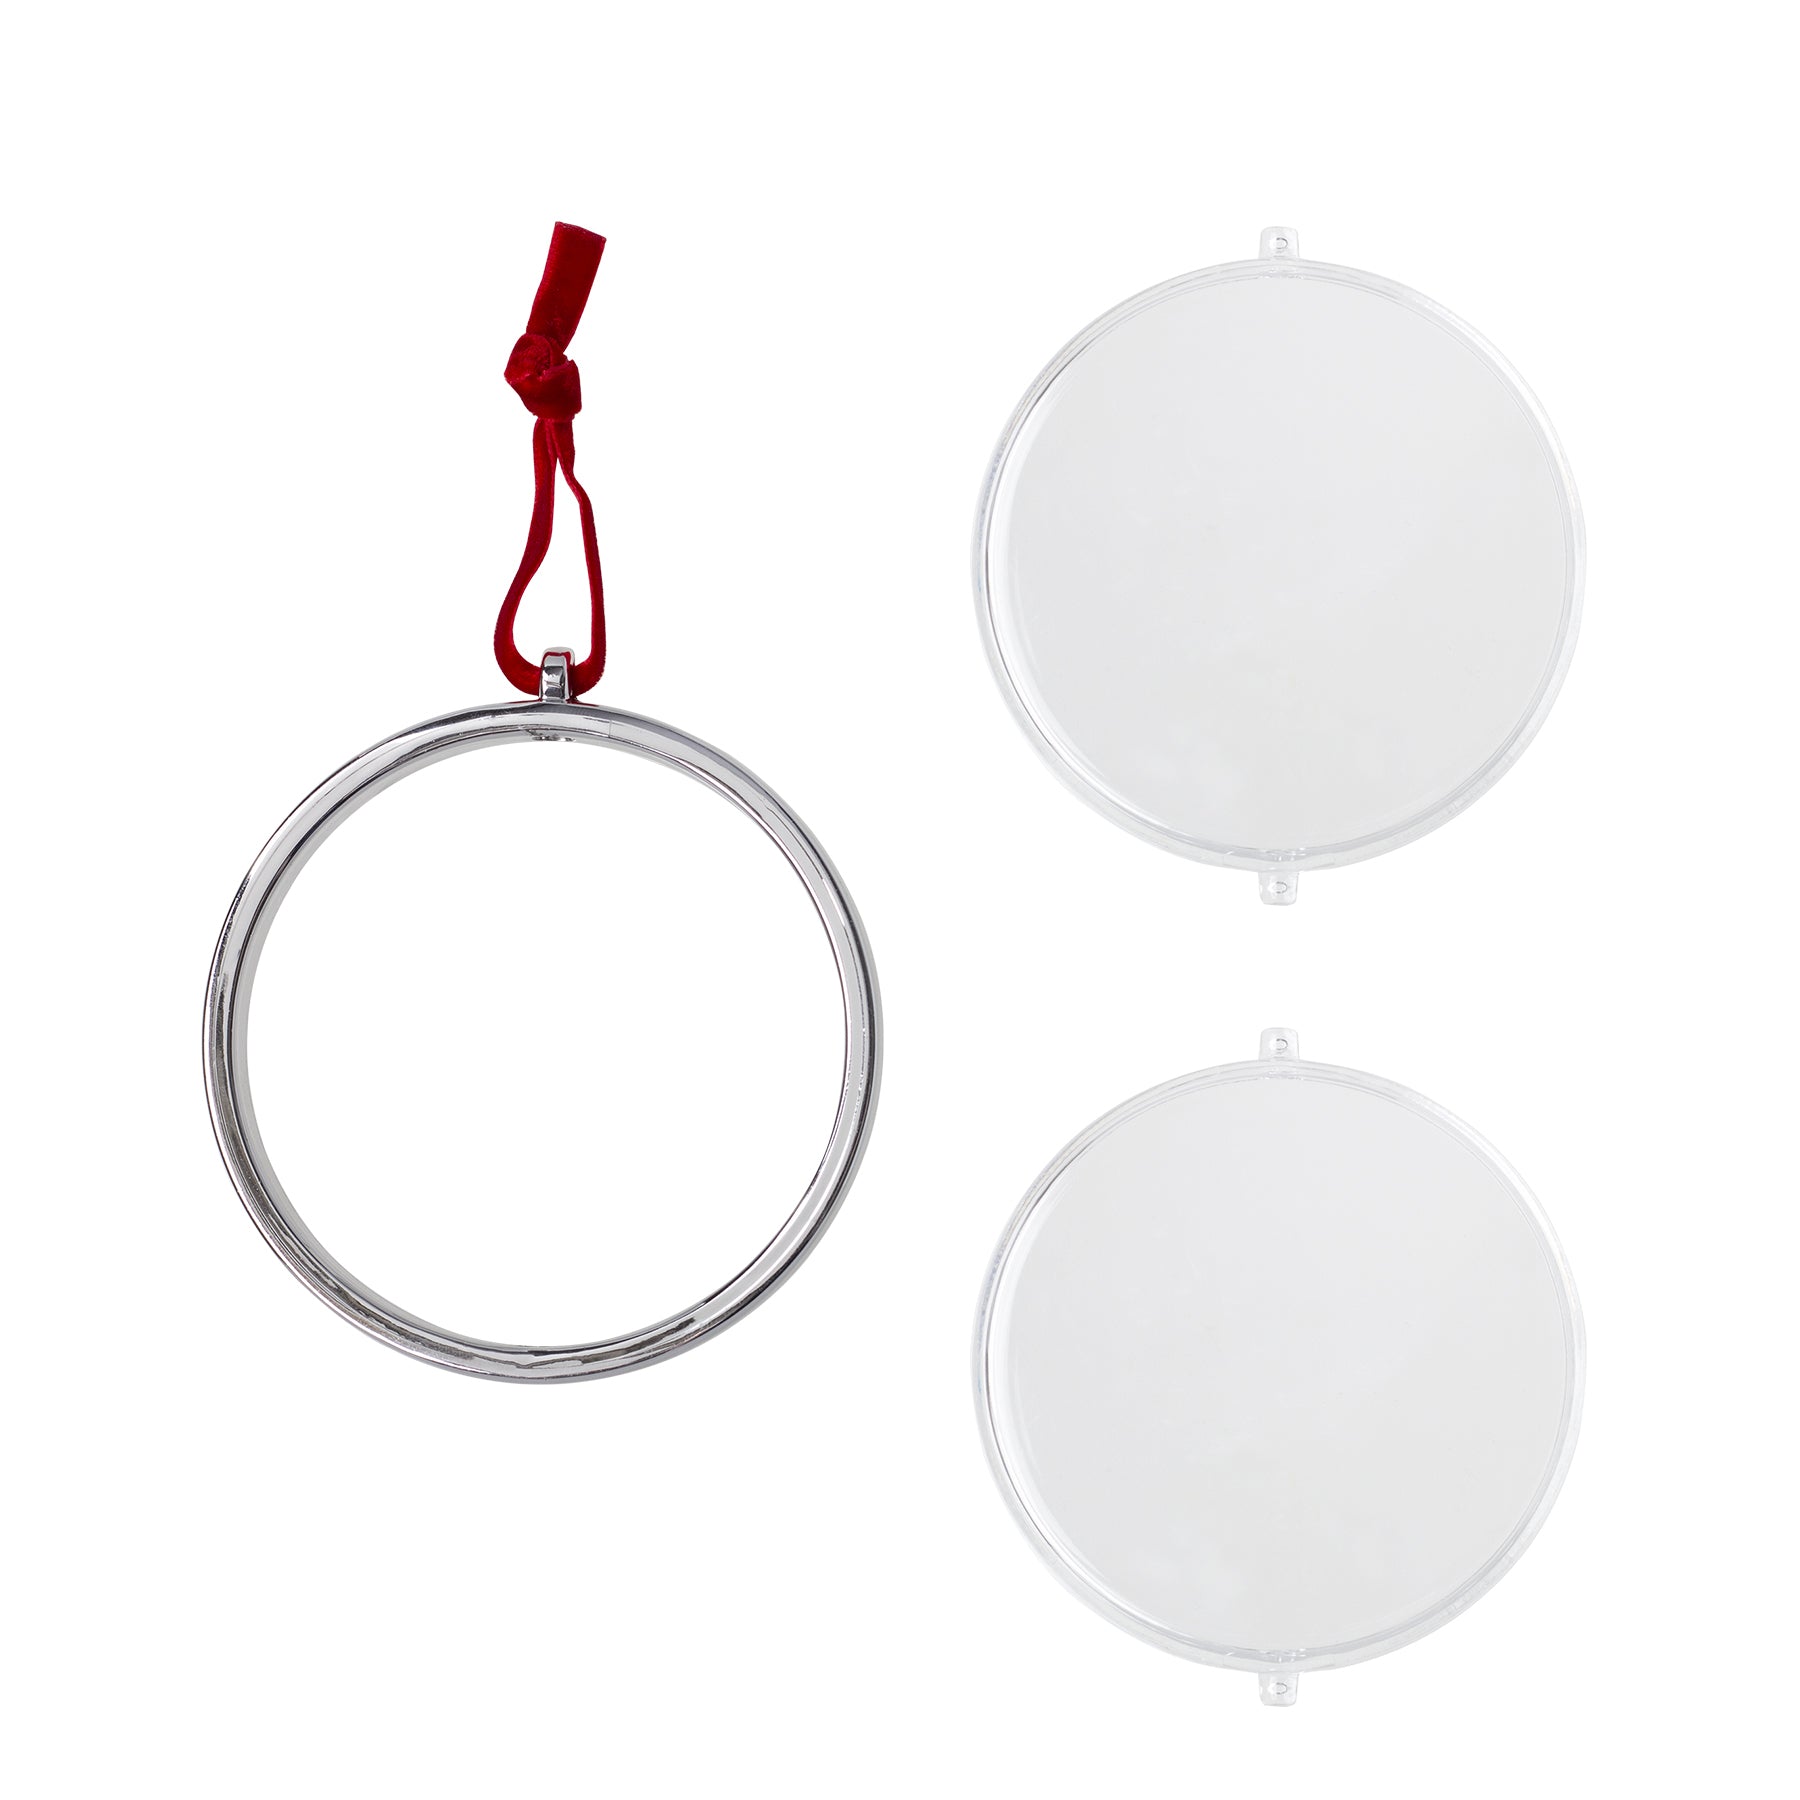 Spinning Photo Ornament - Retail 4 Pack